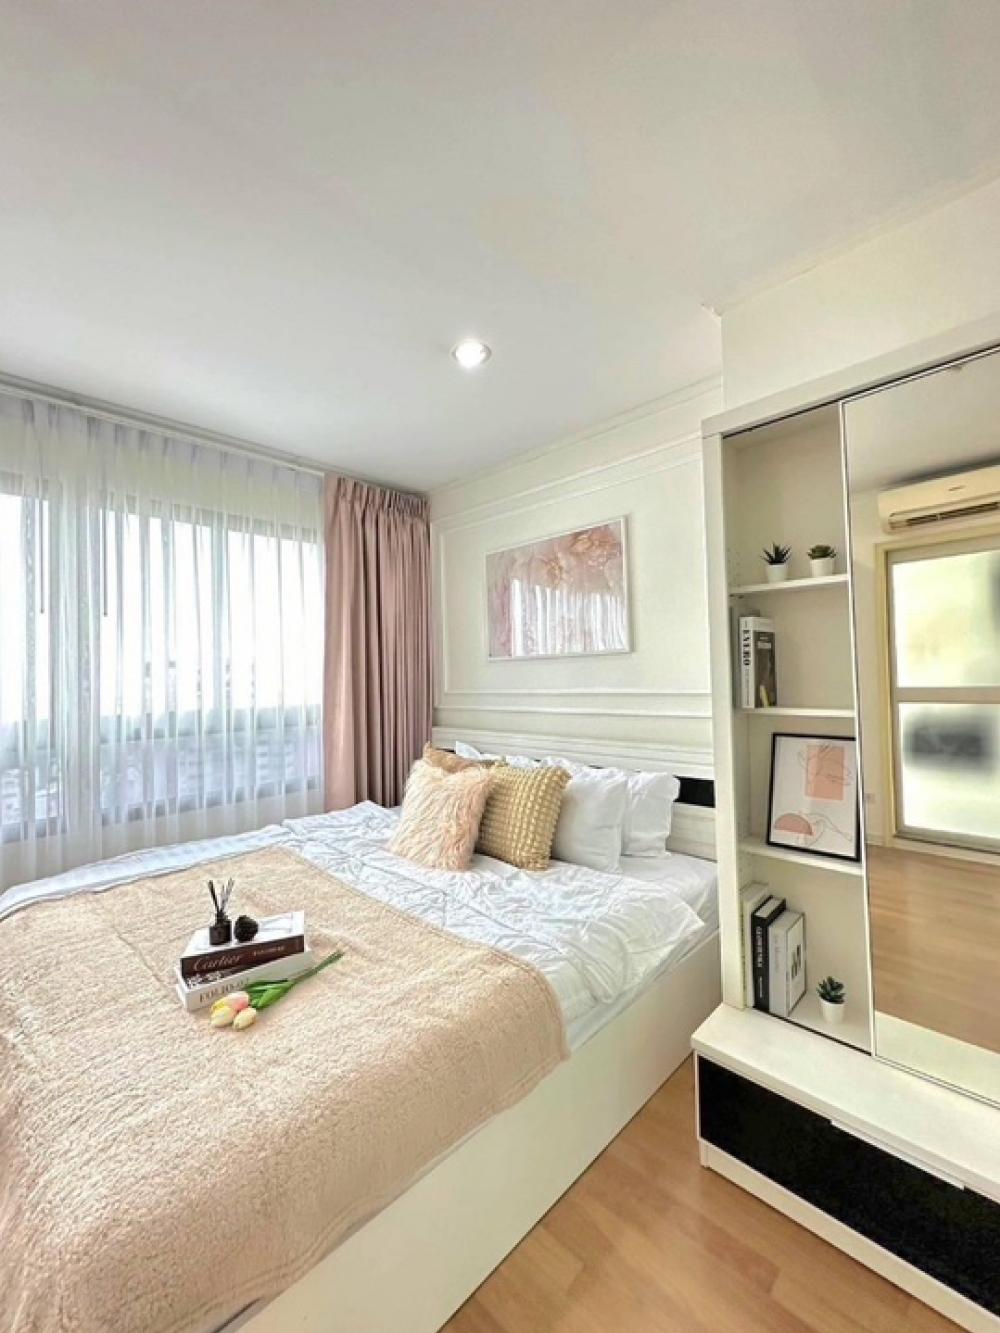 For SaleCondoPinklao, Charansanitwong : ✅ Condo for sale Lumpini place pinklao 2 (Lumpini Place Pinklao 2), size 30 sq m., 14th floor, 1 bedroom, 1 bathroom, 1 kitchen, price 2,050,000 baht, beautifully decorated, complete, ready to move in, Bang Yi Khan Station, hurry and reserve now.